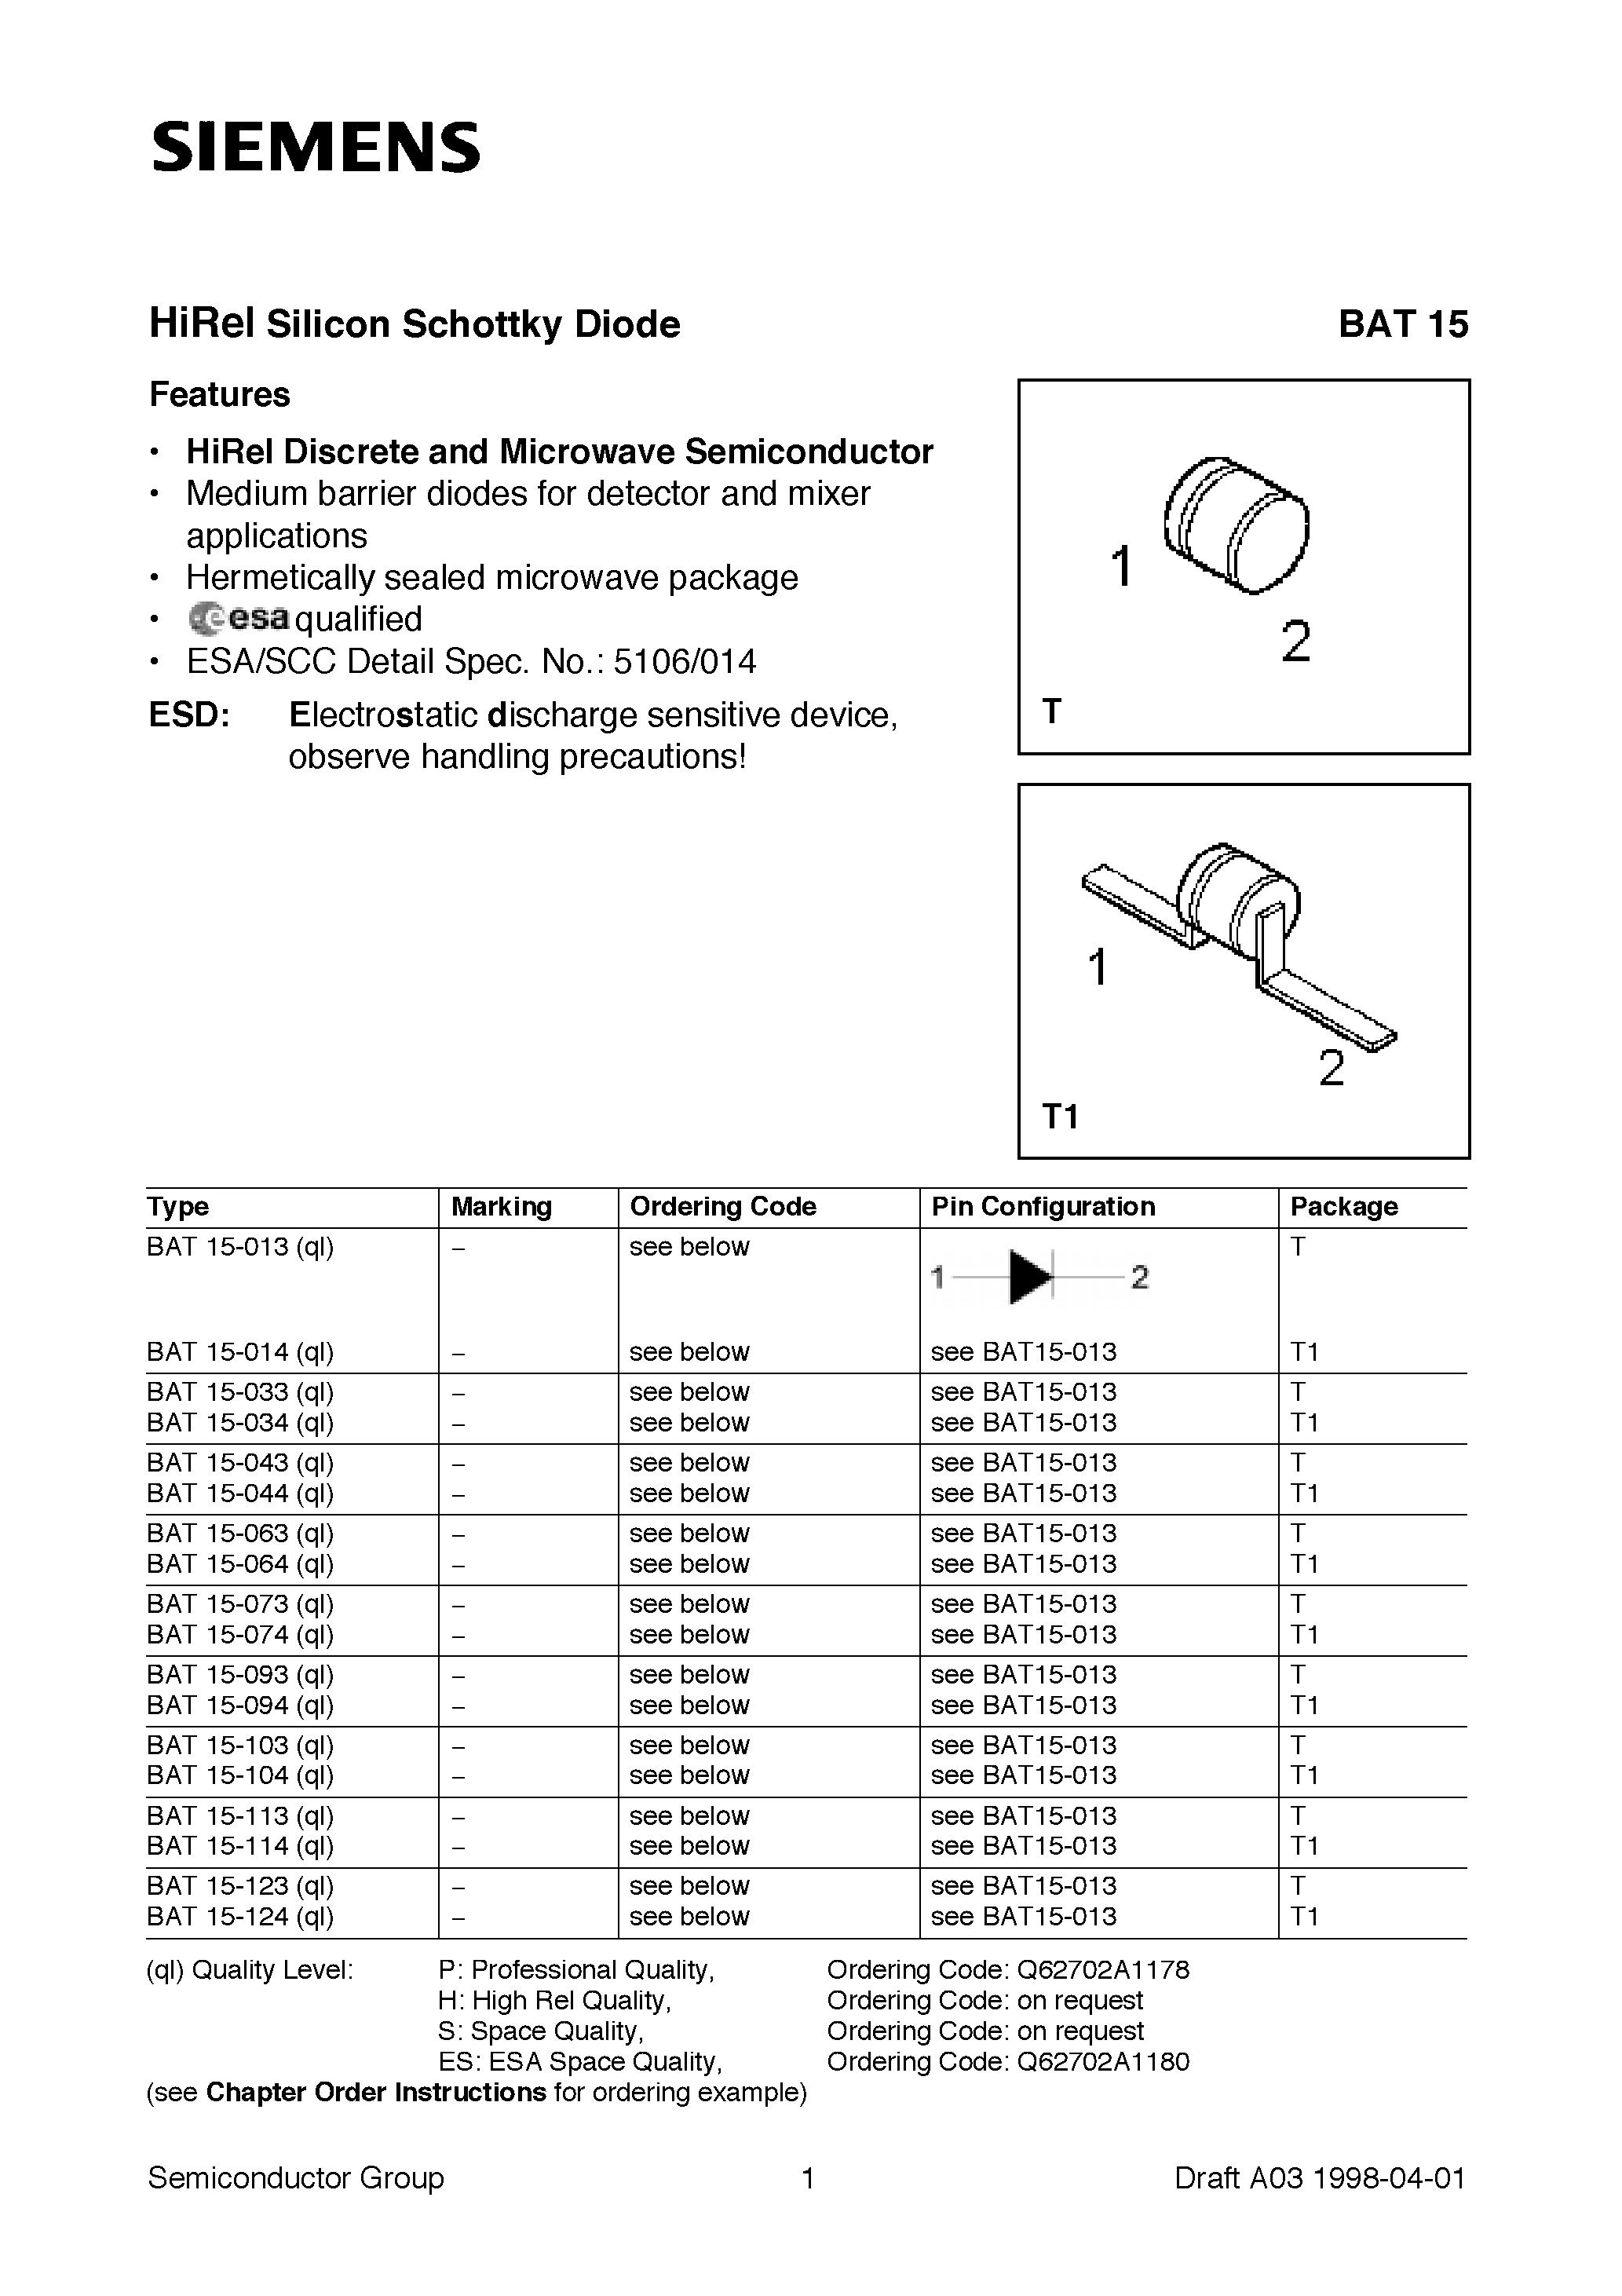 Datasheet BAT15-073 - HiRel Silicon Schottky Diode (HiRel Discrete and Microwave Semiconductor Medium barrier diodes for detector and mixer applications) page 1